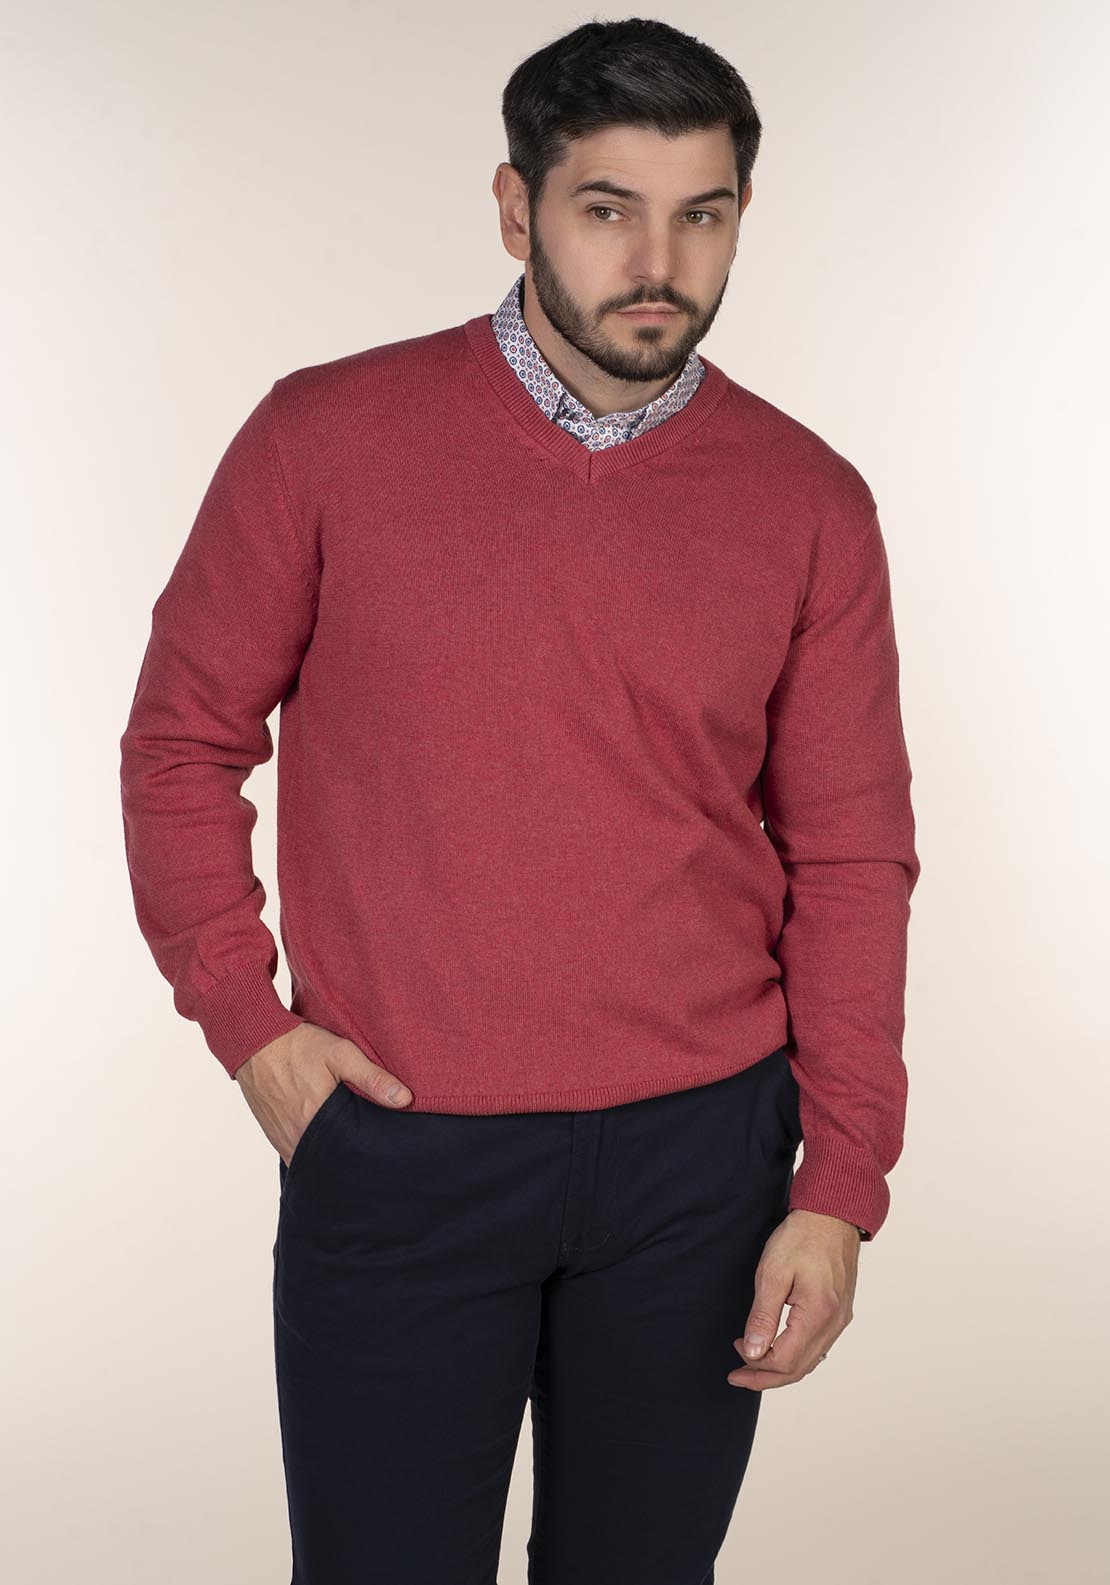 Yeats Plain Cotton V Neck Sweaters 2 Shaws Department Stores